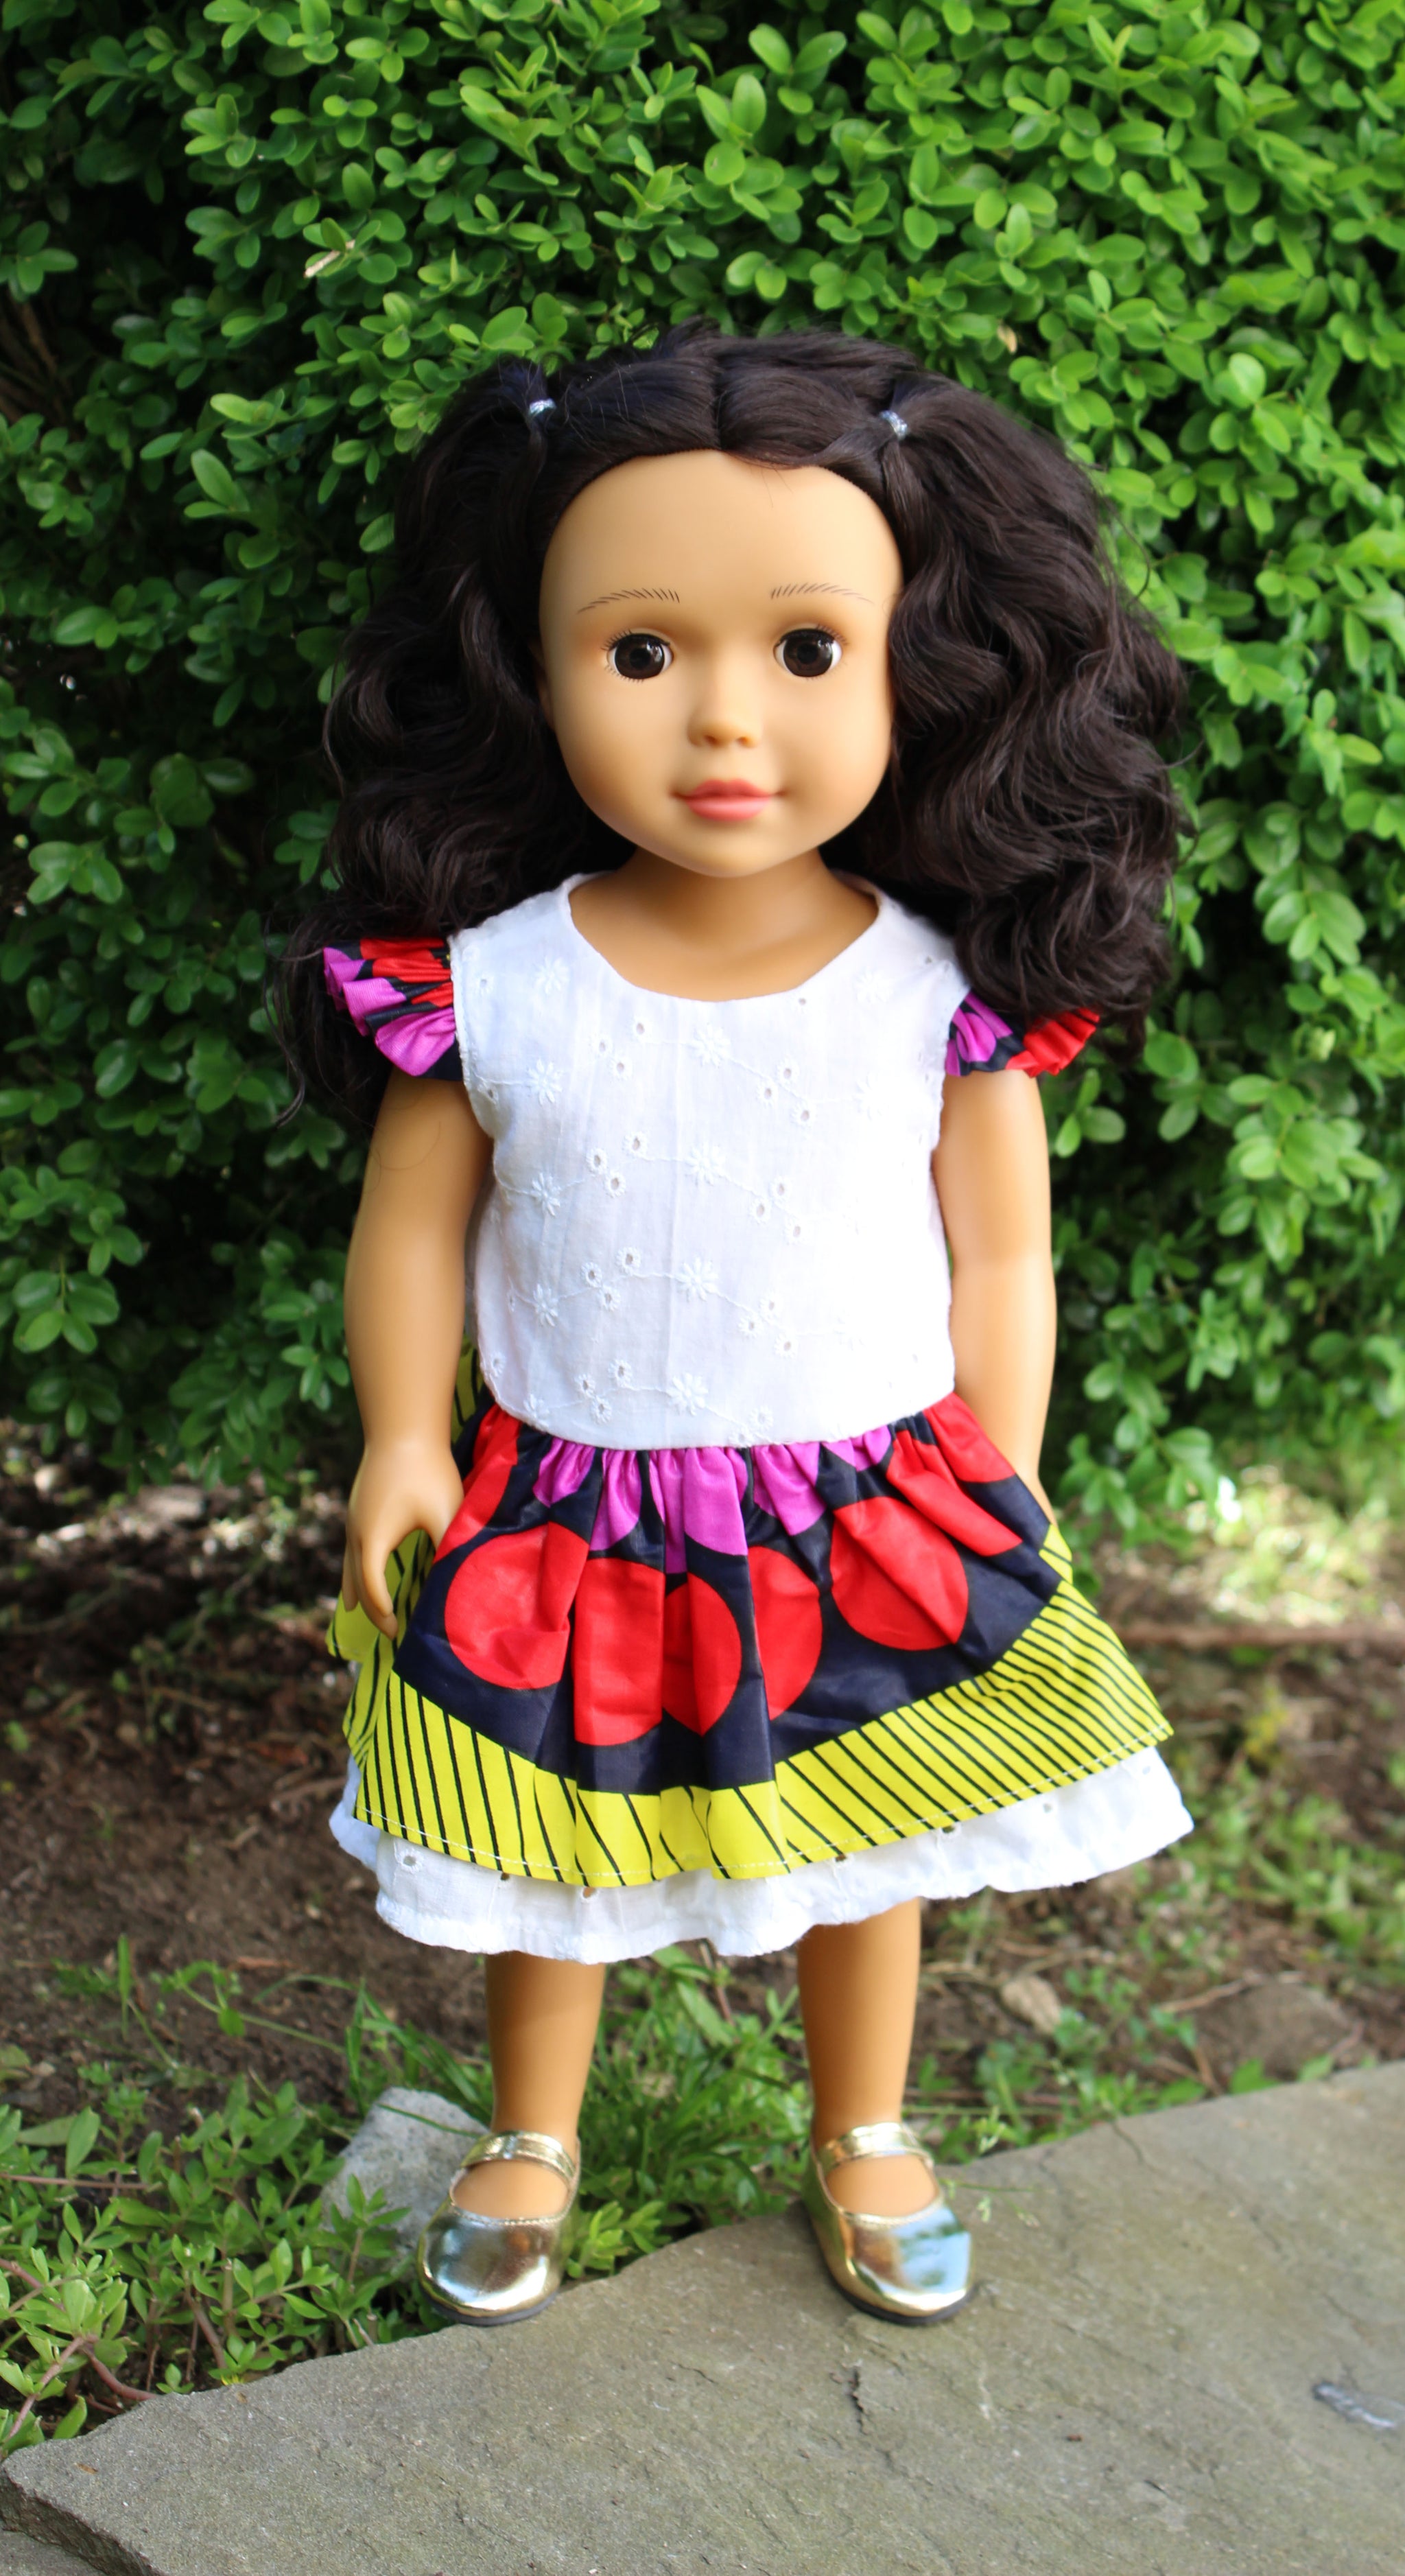 mixed race doll with curly hair